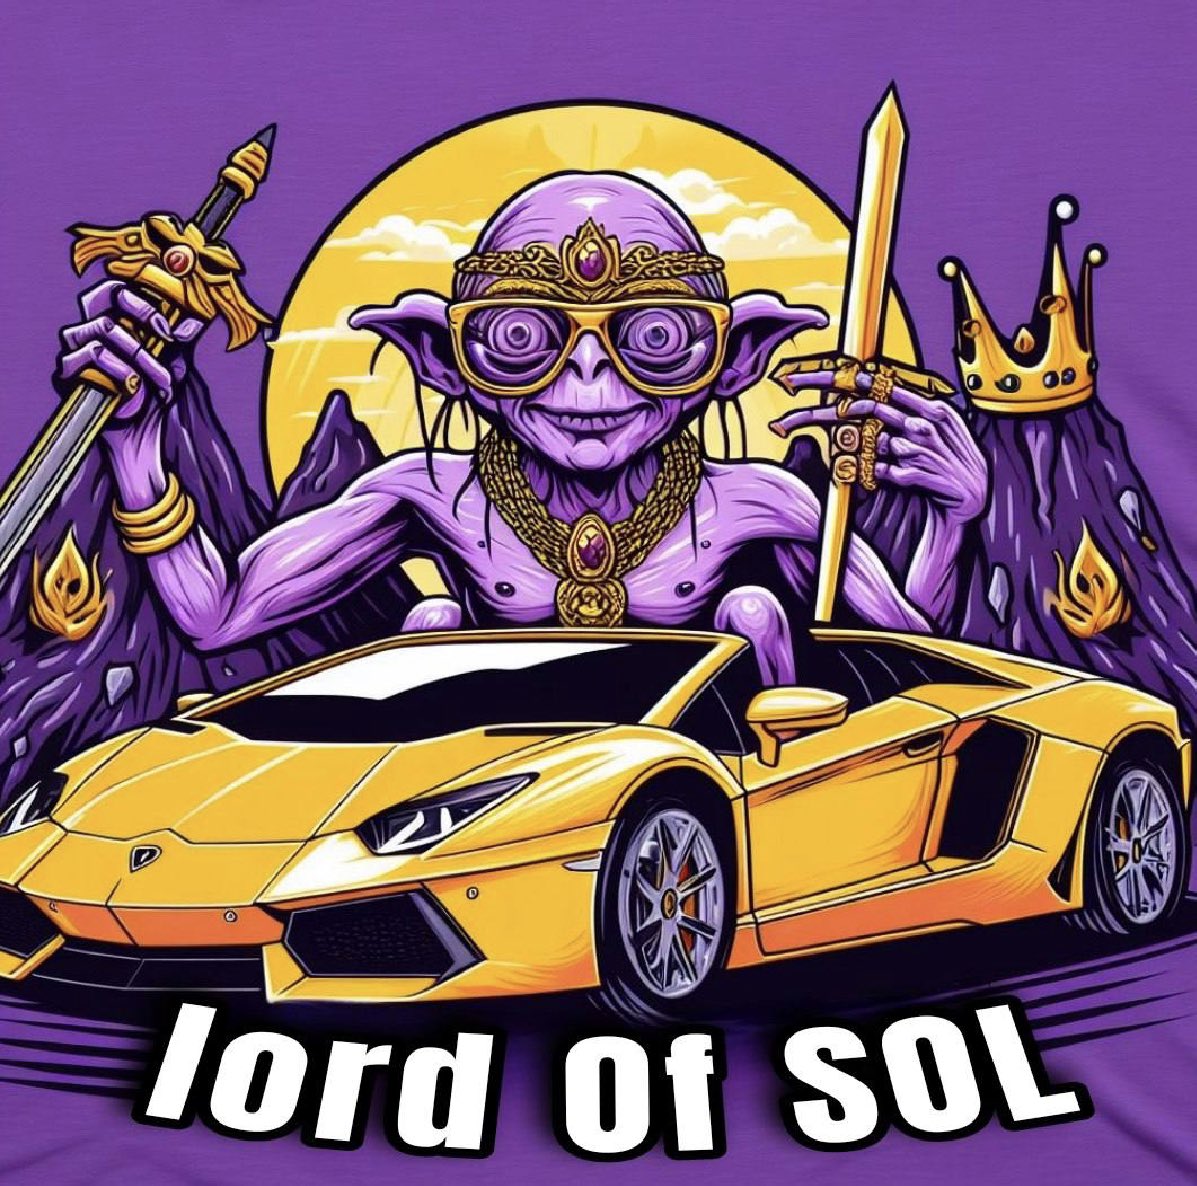 Introducing Lord Of SOL ($LOS) 🦍

Why $LOS? 
- Fully community-driven 💪
- Secure team 🔒
- Initial LP: 3,425 SOL Burnt 🔥
- Minting and freezing accounts discontinued 🛑
- No tax or team tokens 💰
- Record-breaking presale (13,700 SOL in just 2 days) 📈

mexc.com/exchange/los_U…